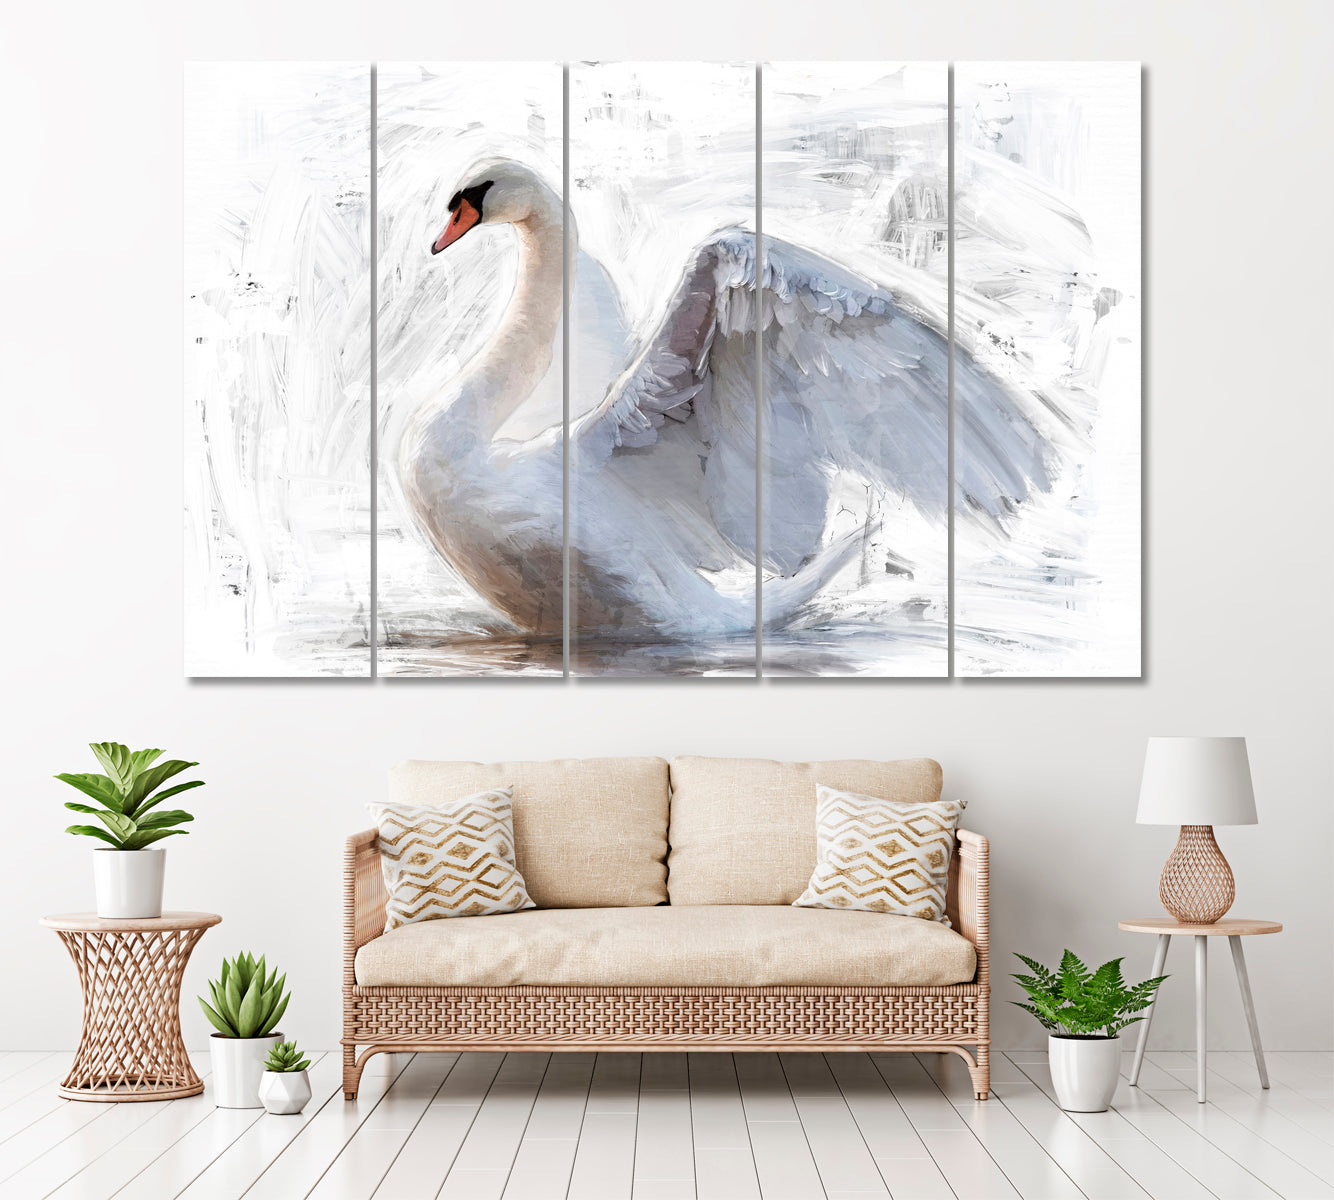 White Swan Canvas Print ArtLexy 5 Panels 36"x24" inches 